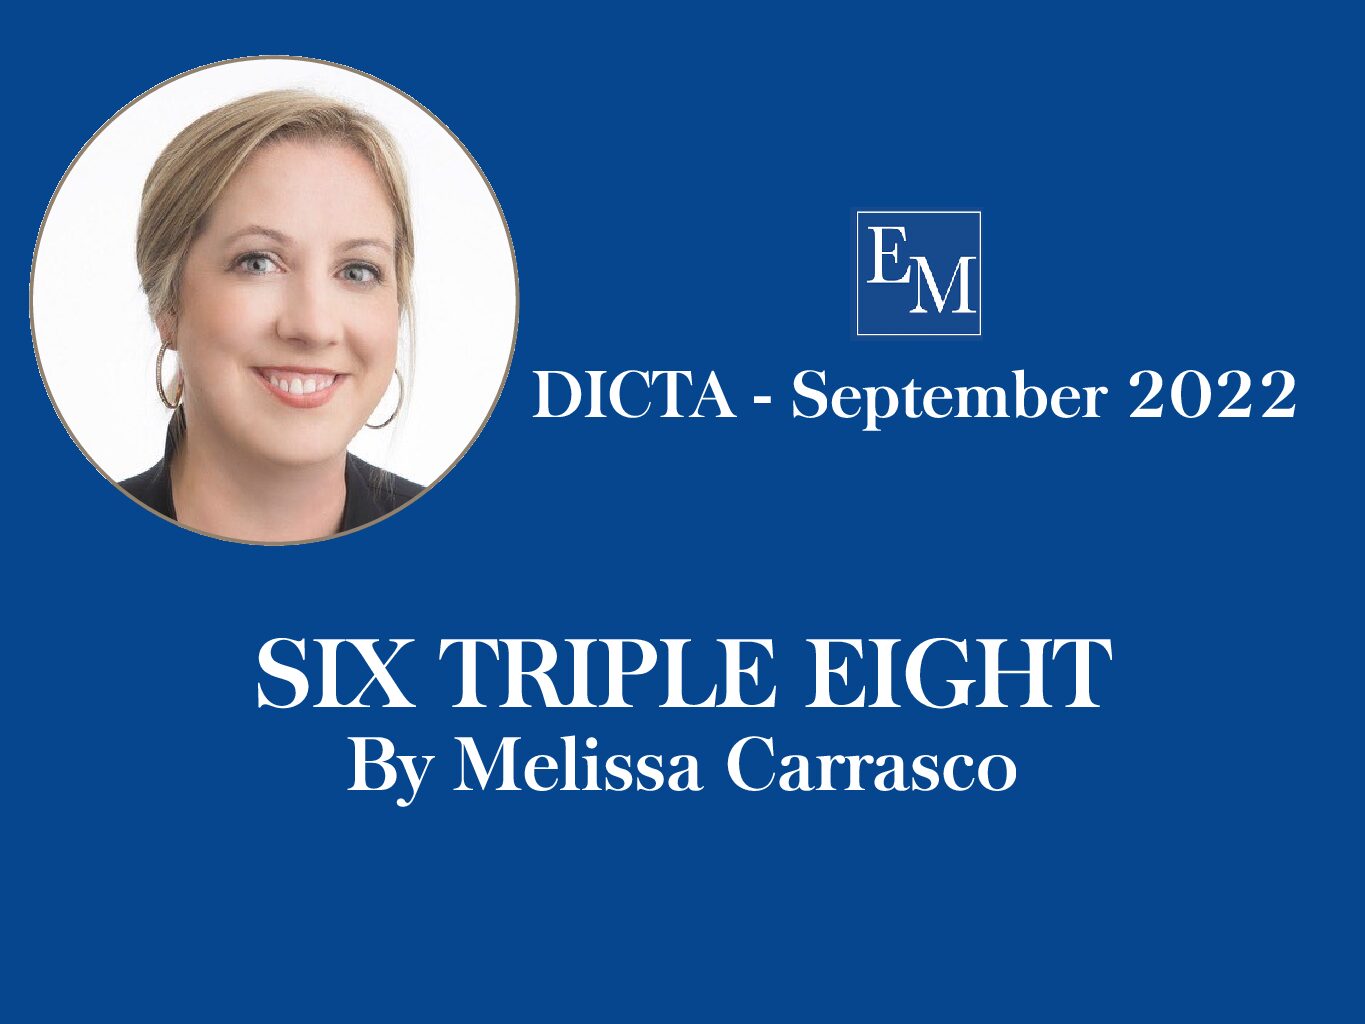 Melissa Carrasco Featured in September DICTA Publication – SIX TRIPLE EIGHT